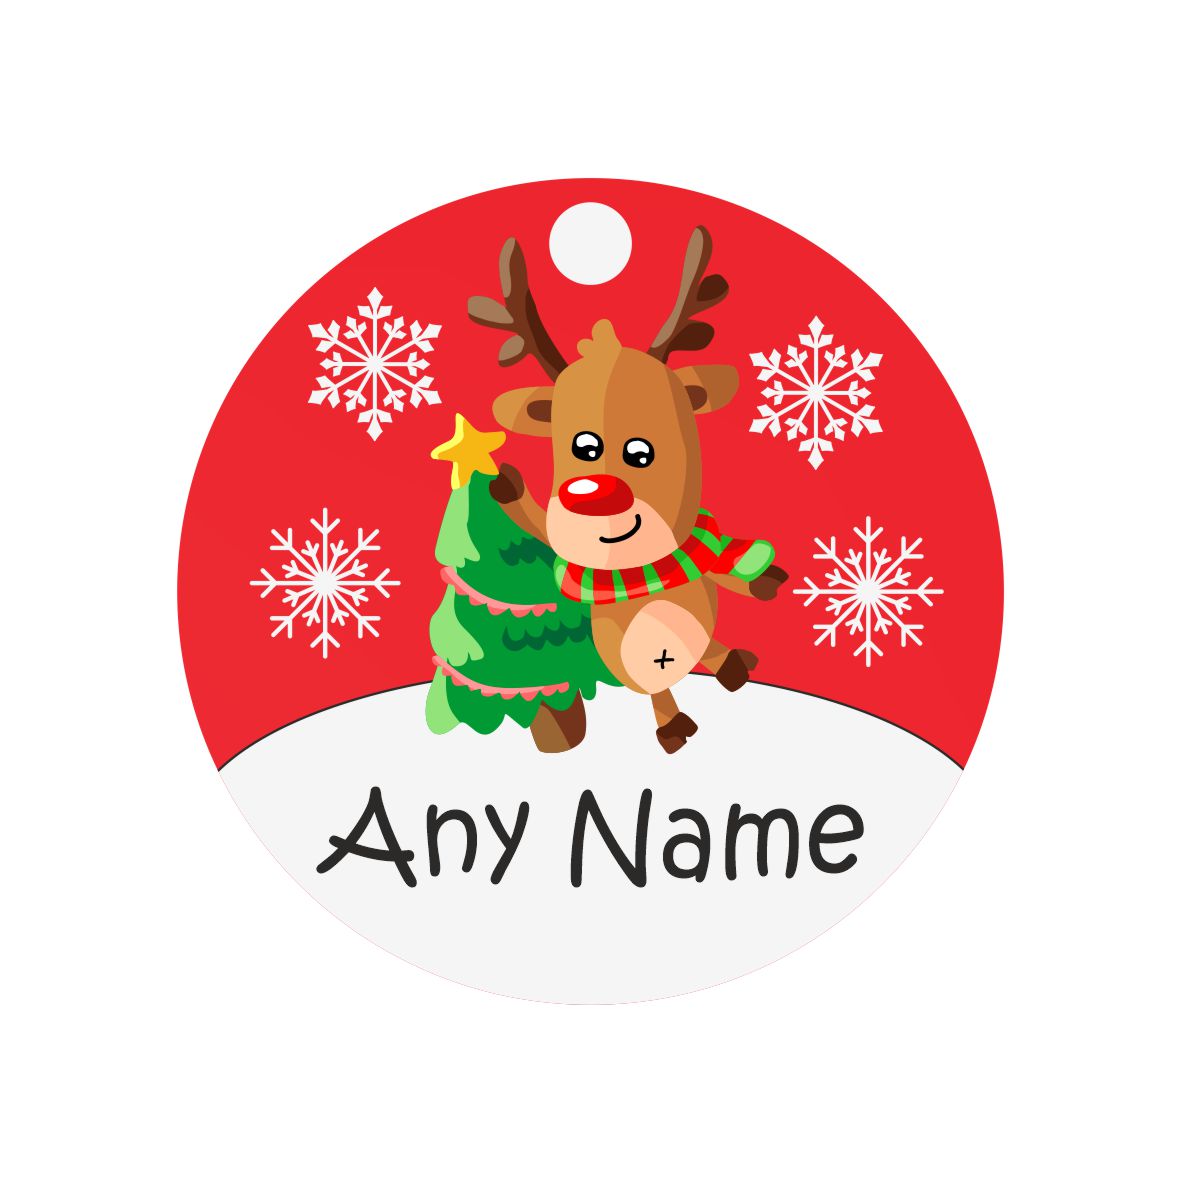 Unique Personalised Bauble - Custom Designed Baubles Printed with Any Name - Ideal as a Gift Tag - DESIGN 1